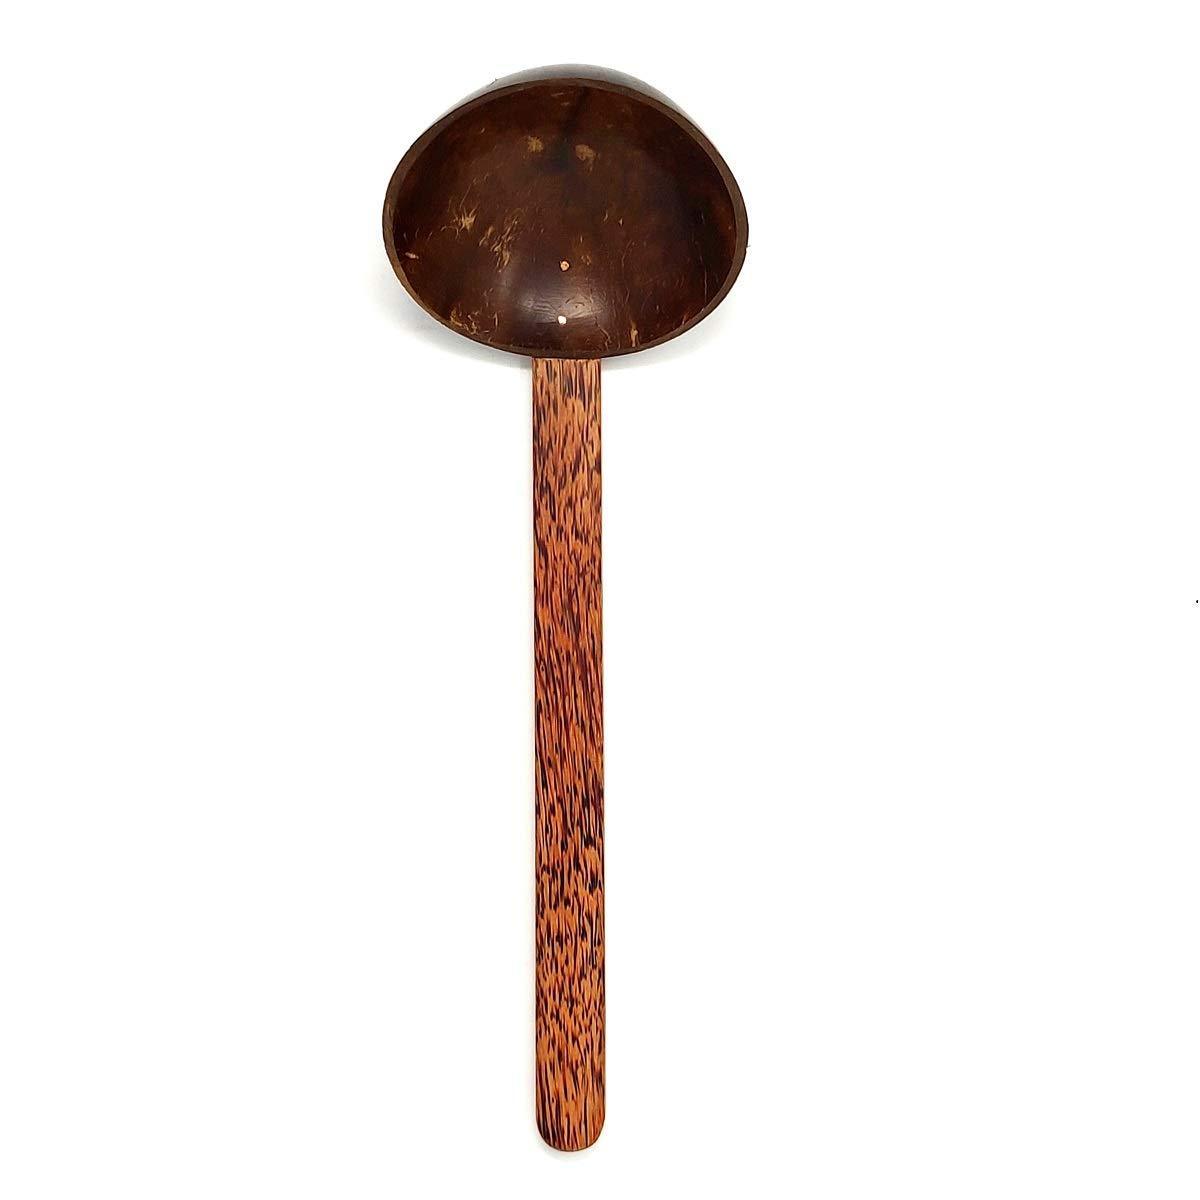 Small Coconut Shell Rice Serving Spoon/Ladle/Spatula- Natural - Organic - Hand Made - Made from Coconut Shell and Coconut Wood - www.indiancart.com.au - Spoons - - Indian Cart